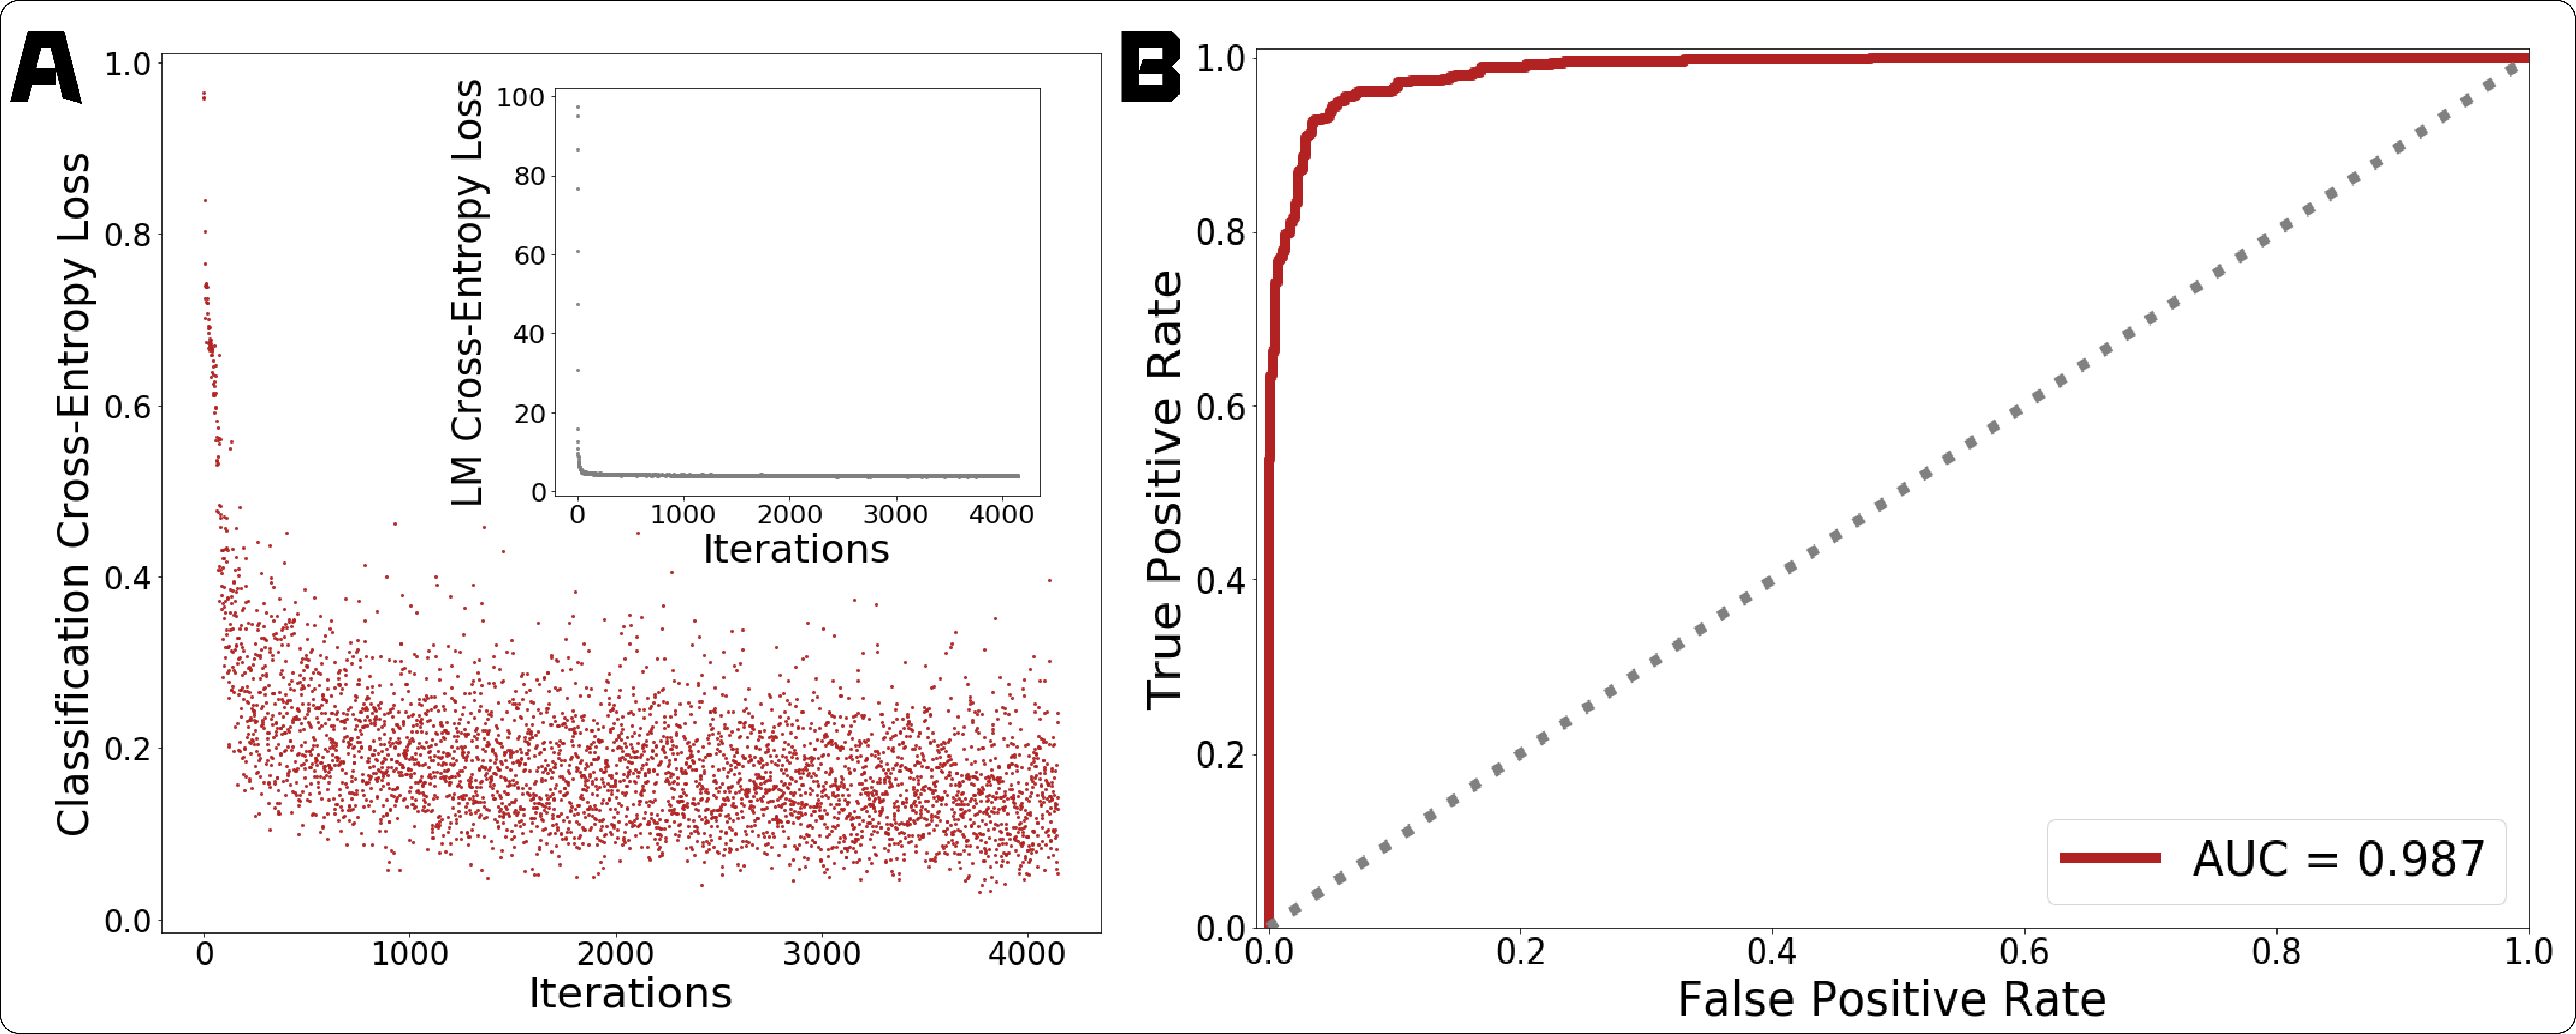 (A) Training loss histories during GPT-2 fine-tuning for the classification (red) and LM (grey, inset) tasks. (B) ROC curve (red) evaluated on the held out fine-tuning test set, contrasted with random guess (grey dotted).